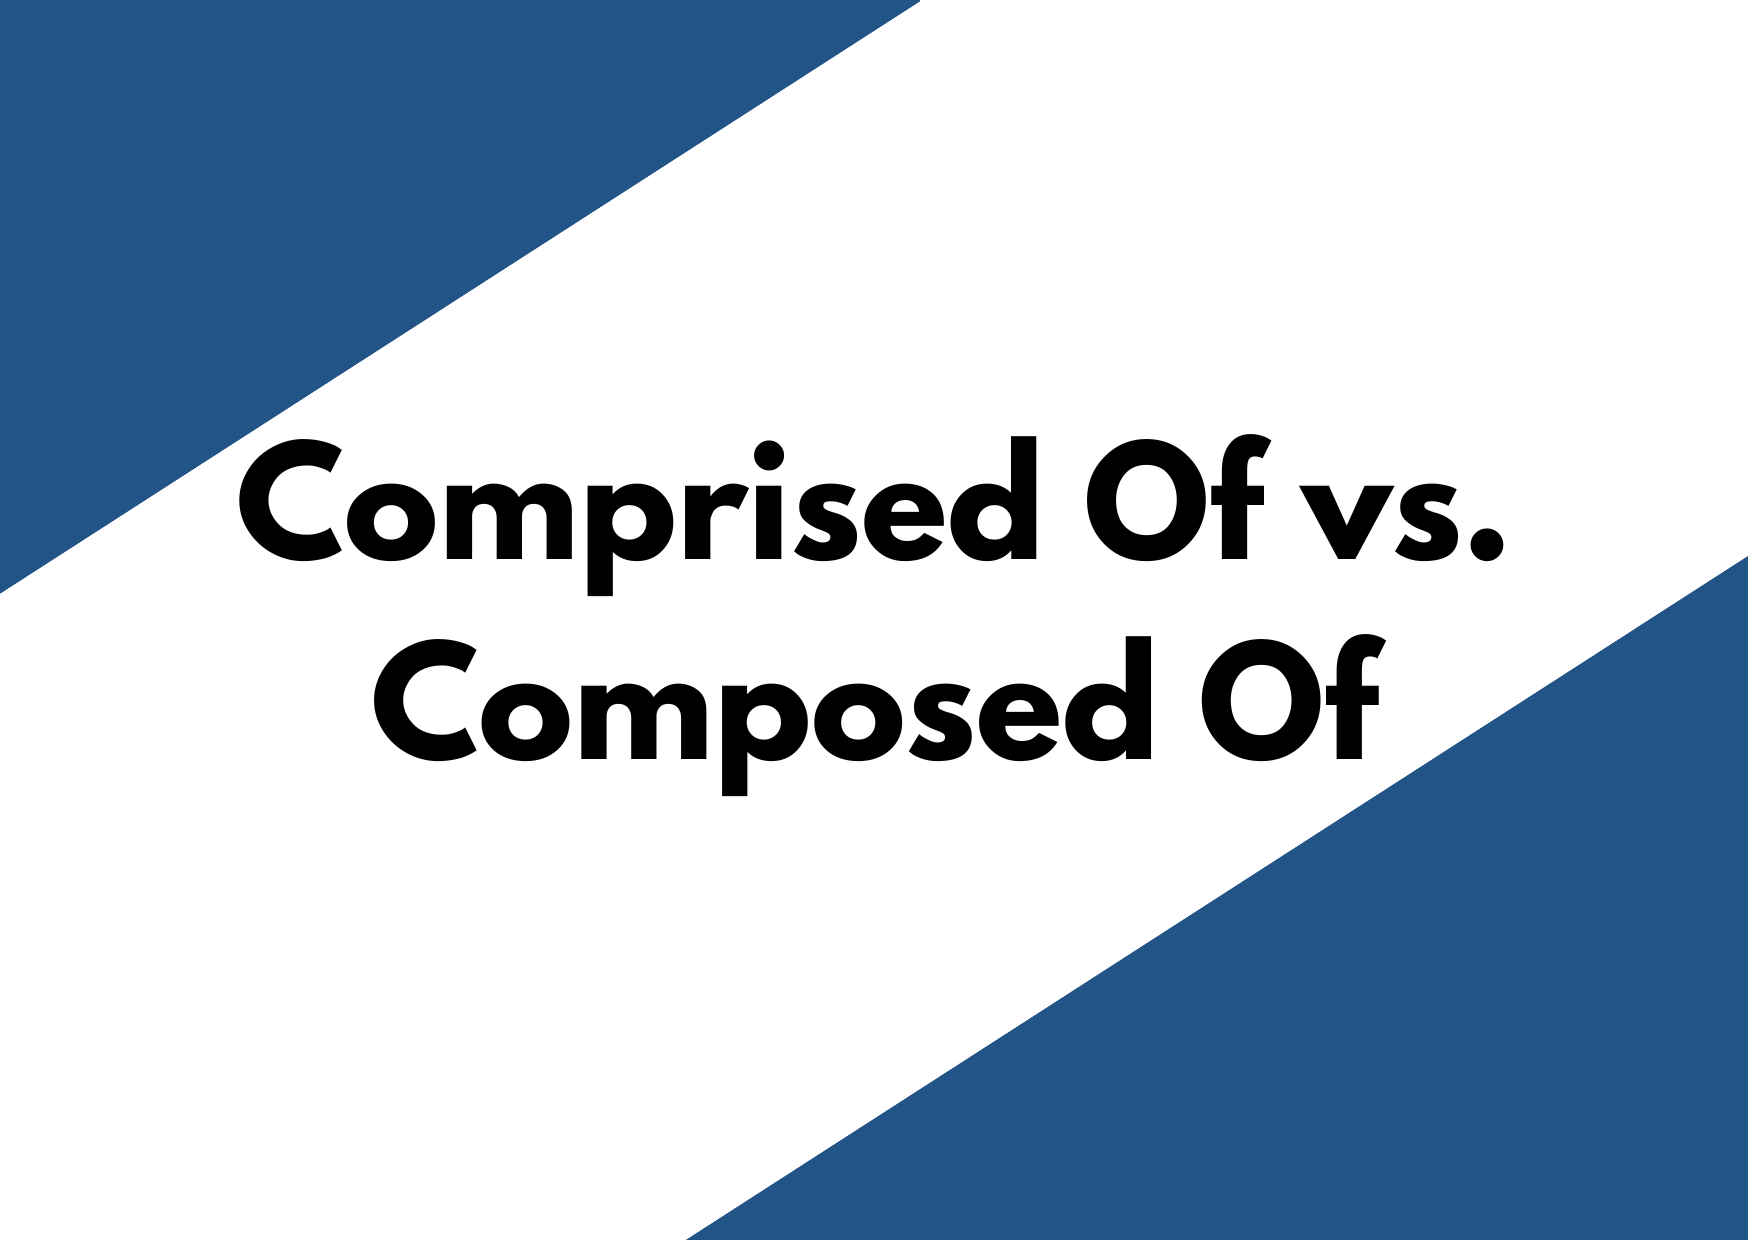 A white and blue background with the words: "Comprised of vs. Composed"